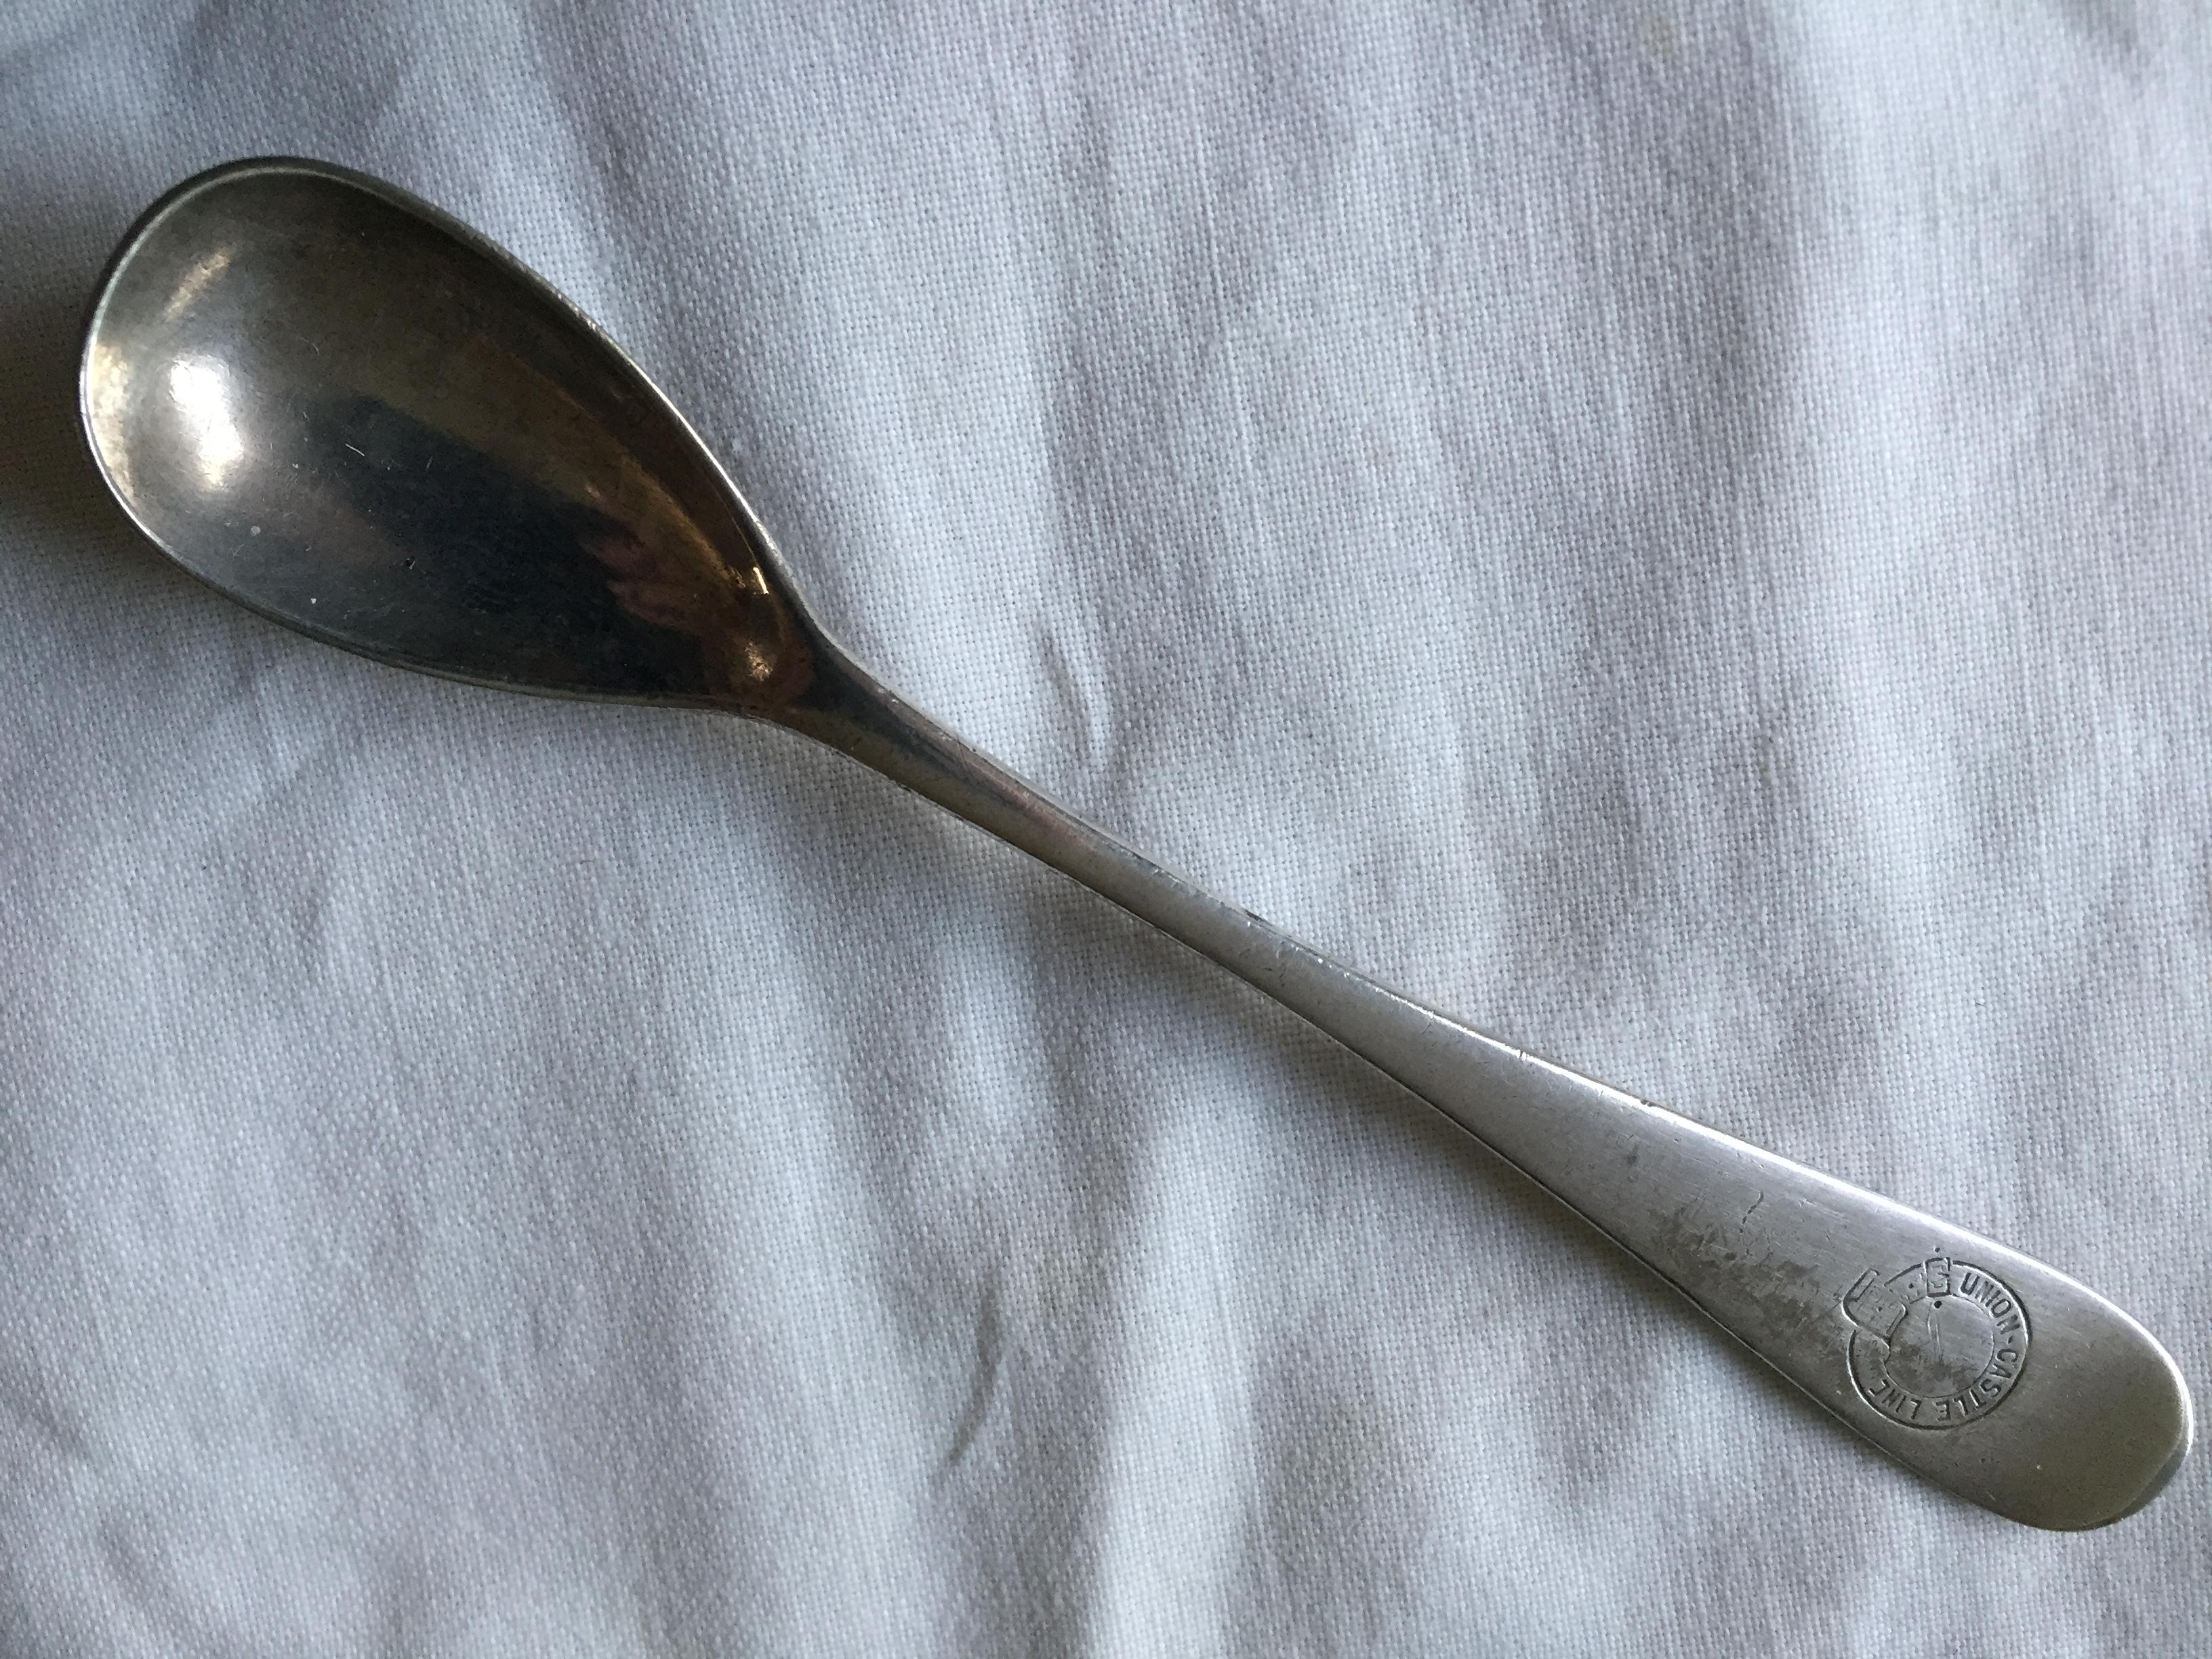 AS USED IN SERVICE RARE FIND MUSTARD SPOON FROM THE UNION CASTLE LINE